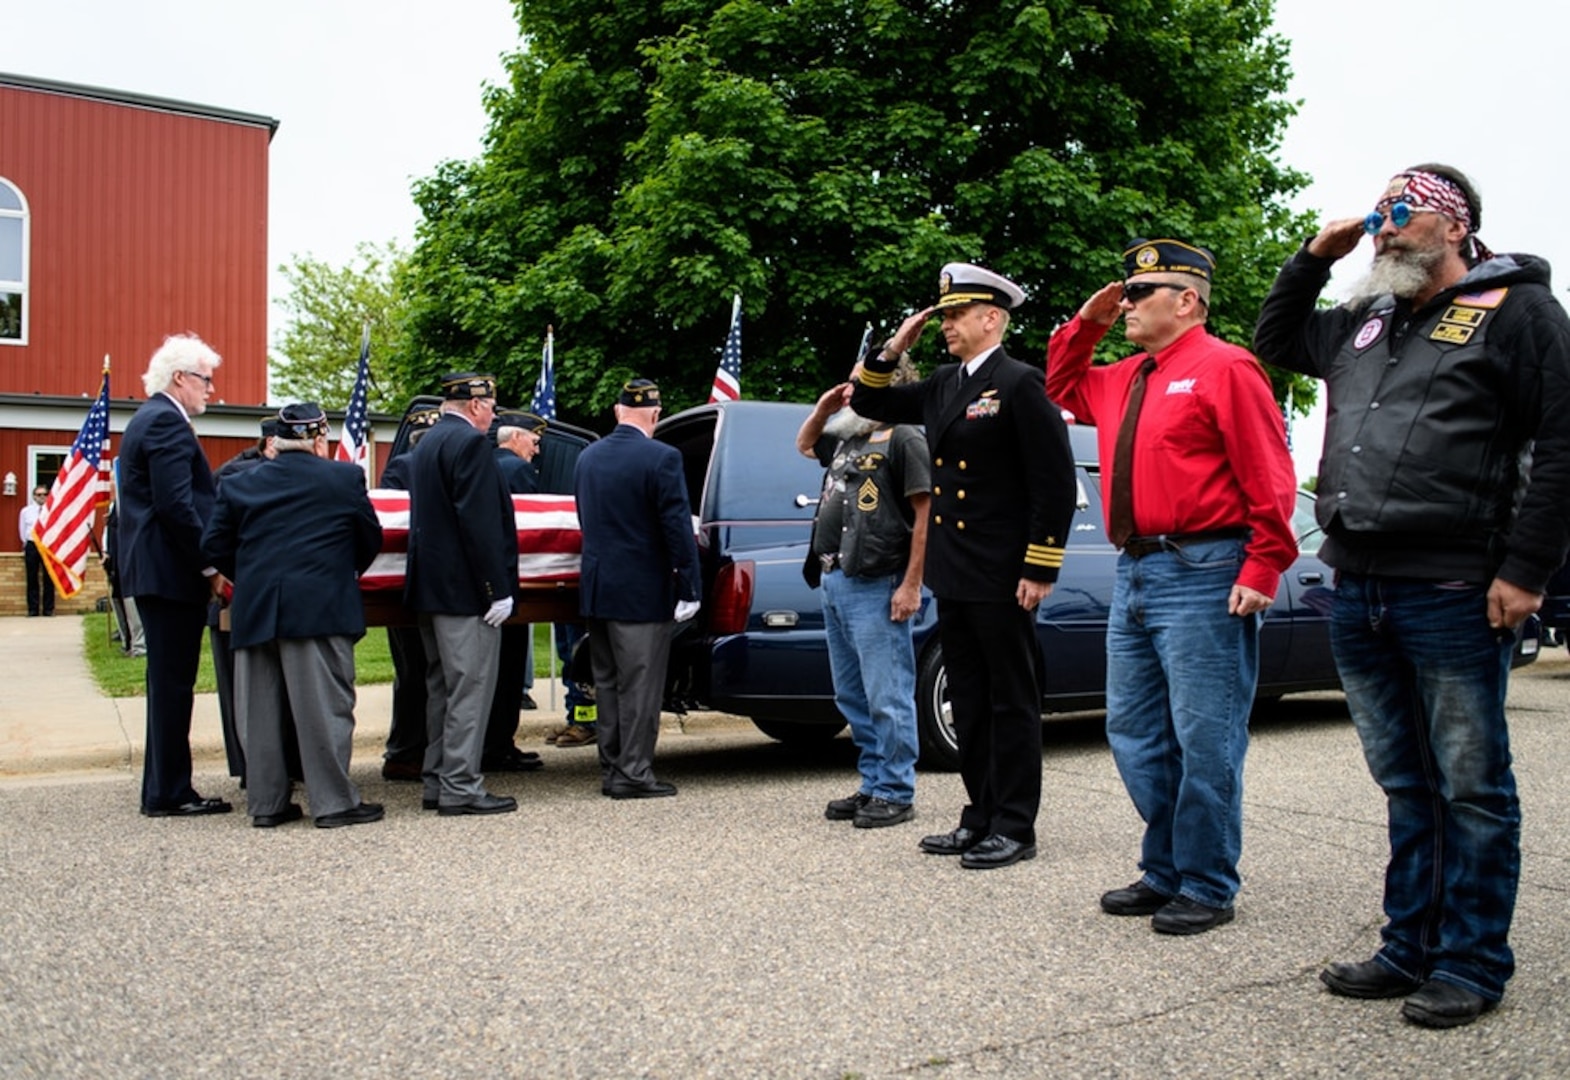 Pallbearers at rear of frame, unloading flag-draped casket from hearse; at right, civilians and Navy captain in class A uniform stand at attention.